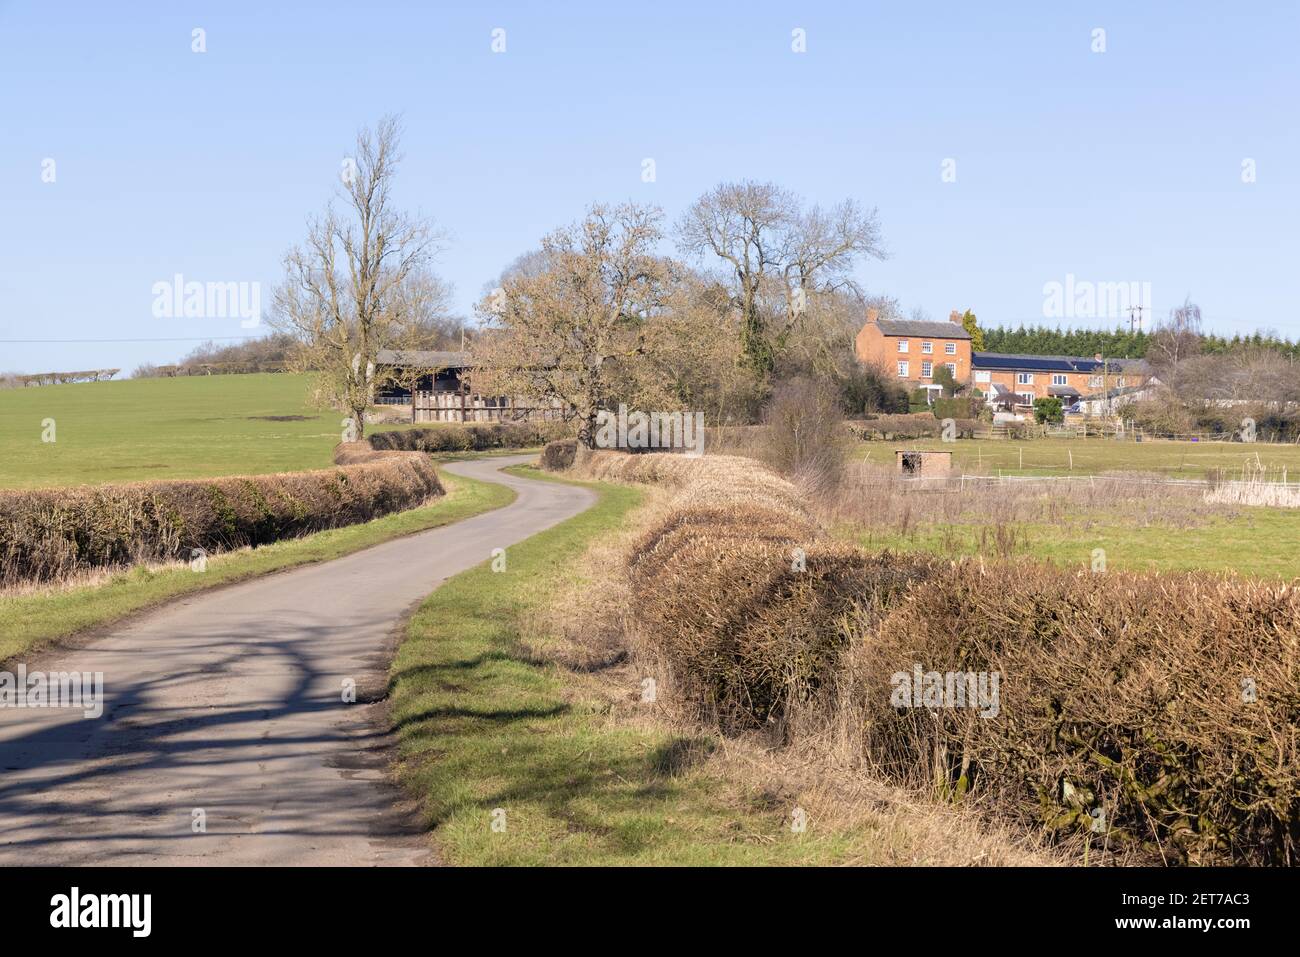 Crick, Northamptonshire, UK - 27th February 2021: A winding country road between hedgerows curves sinuously up a hill to farm buildings. Stock Photo